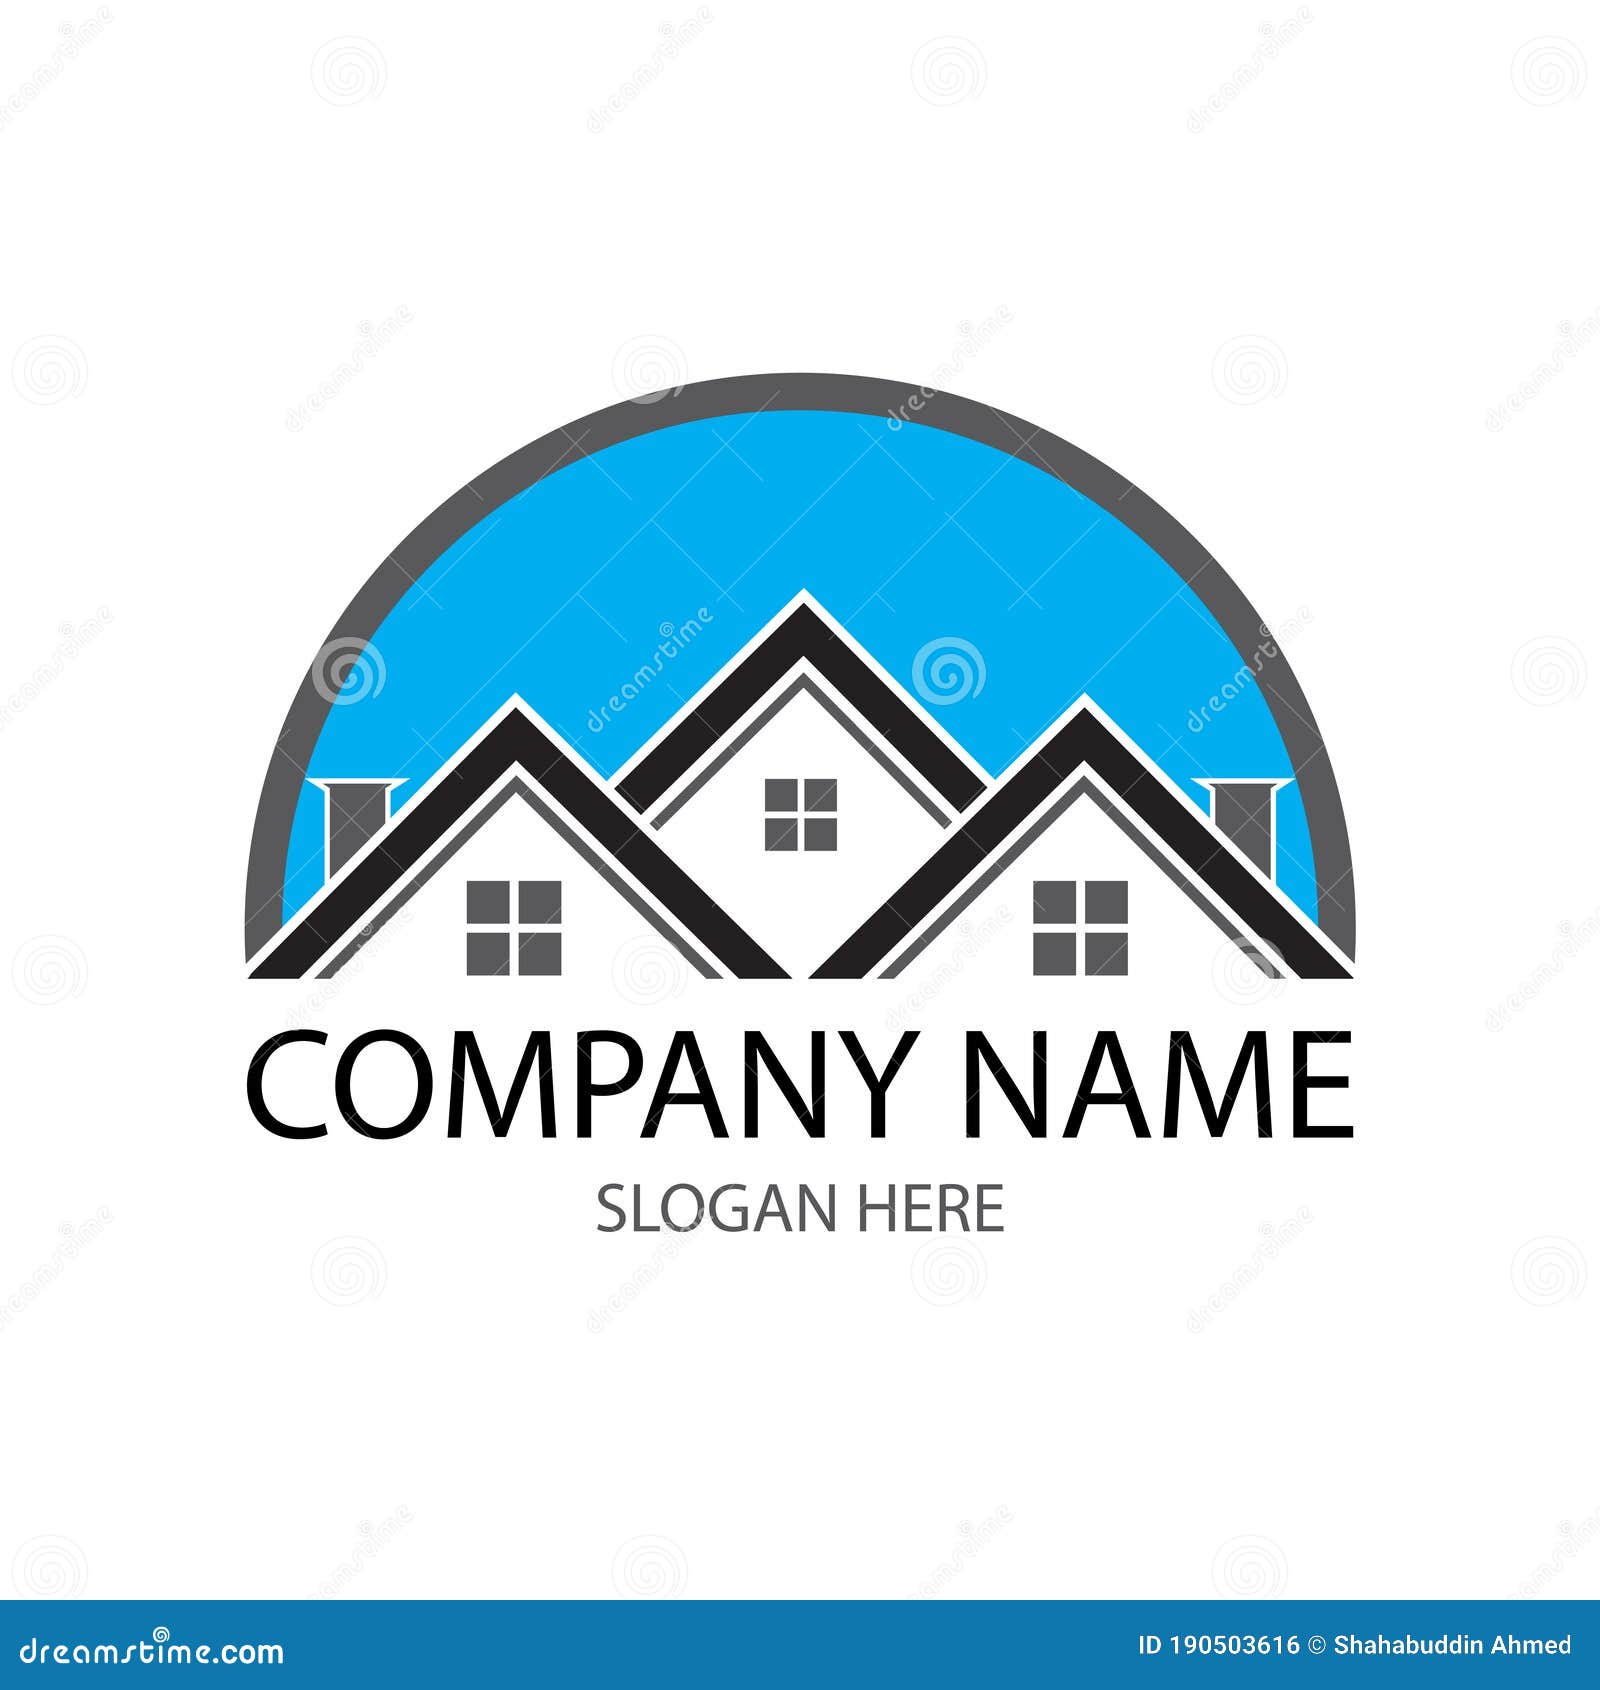 Real Estate , Property and Construction Logo Design for Business ...